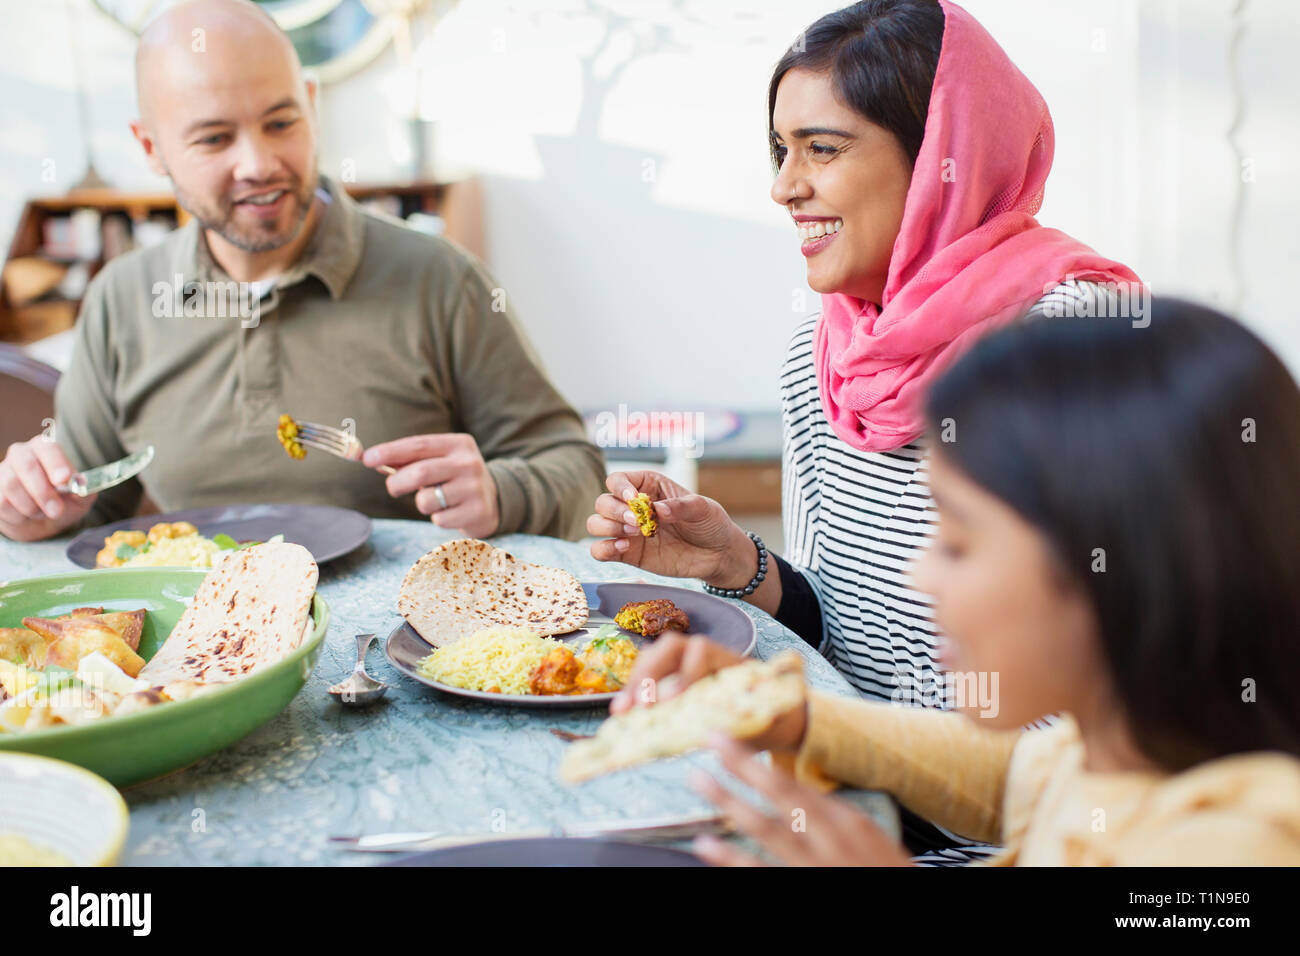 Happy woman in hijab eating dinner with family at table Stock Photo